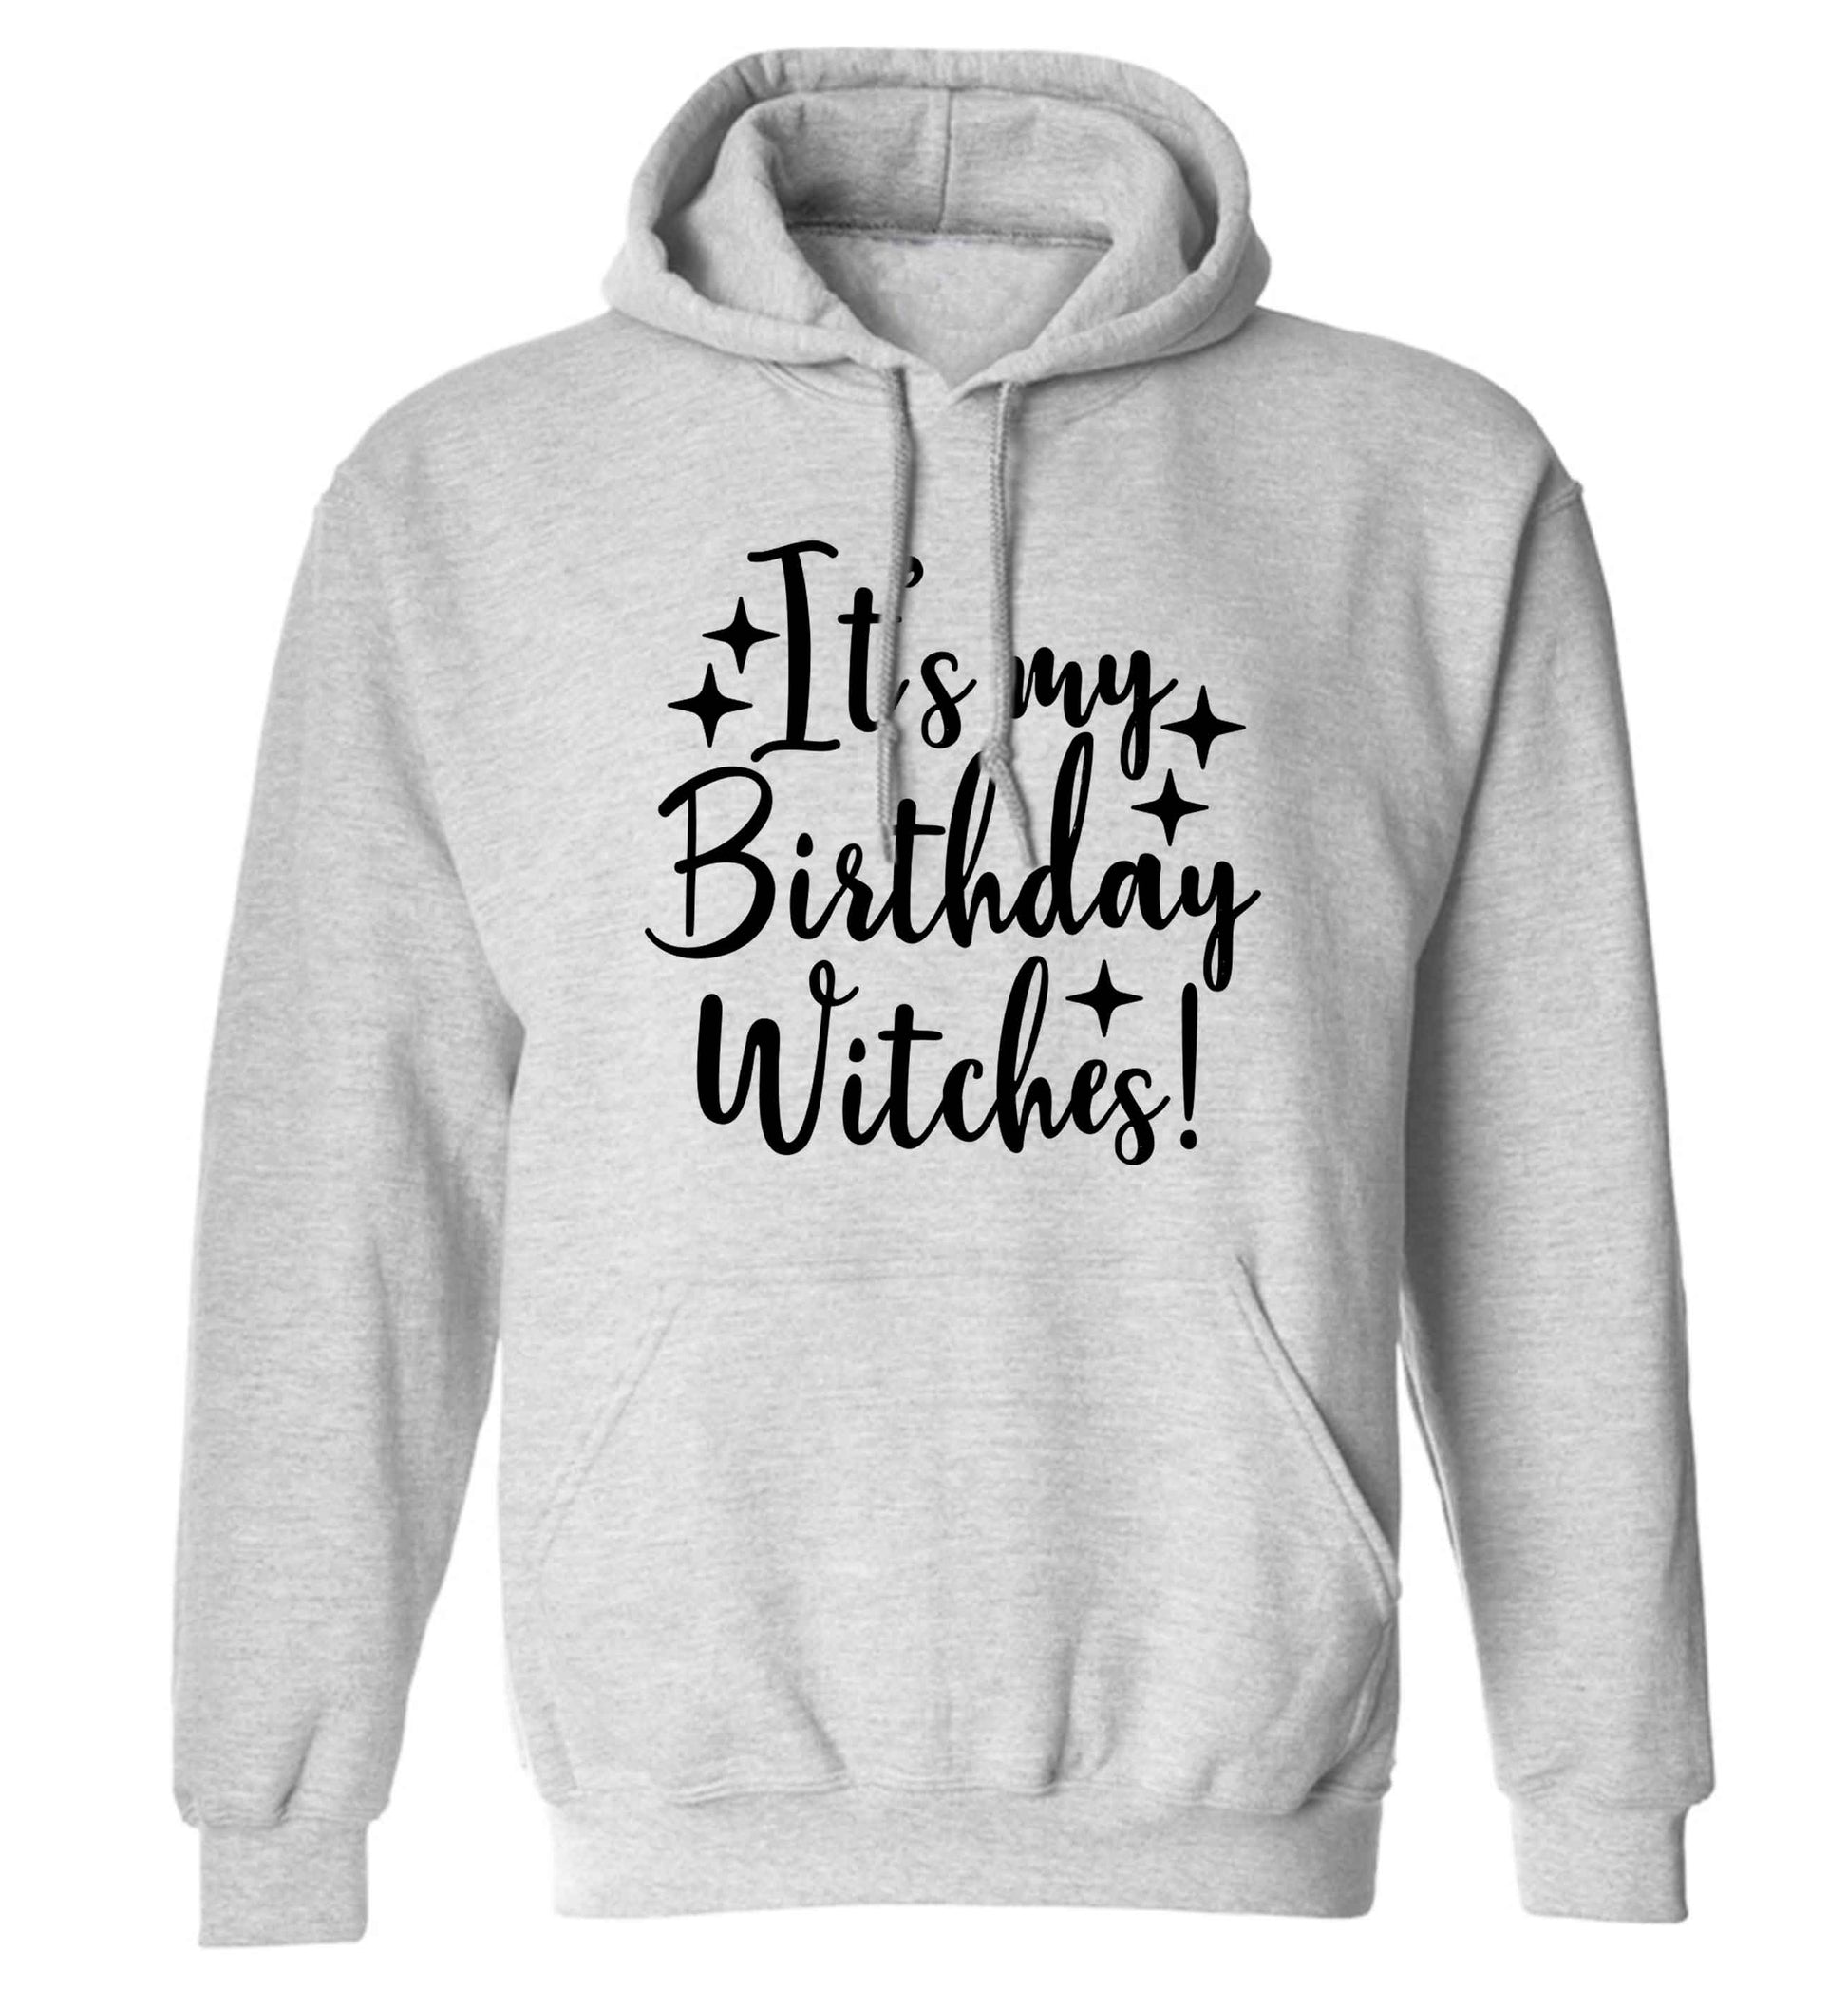 It's my birthday witches!adults unisex grey hoodie 2XL